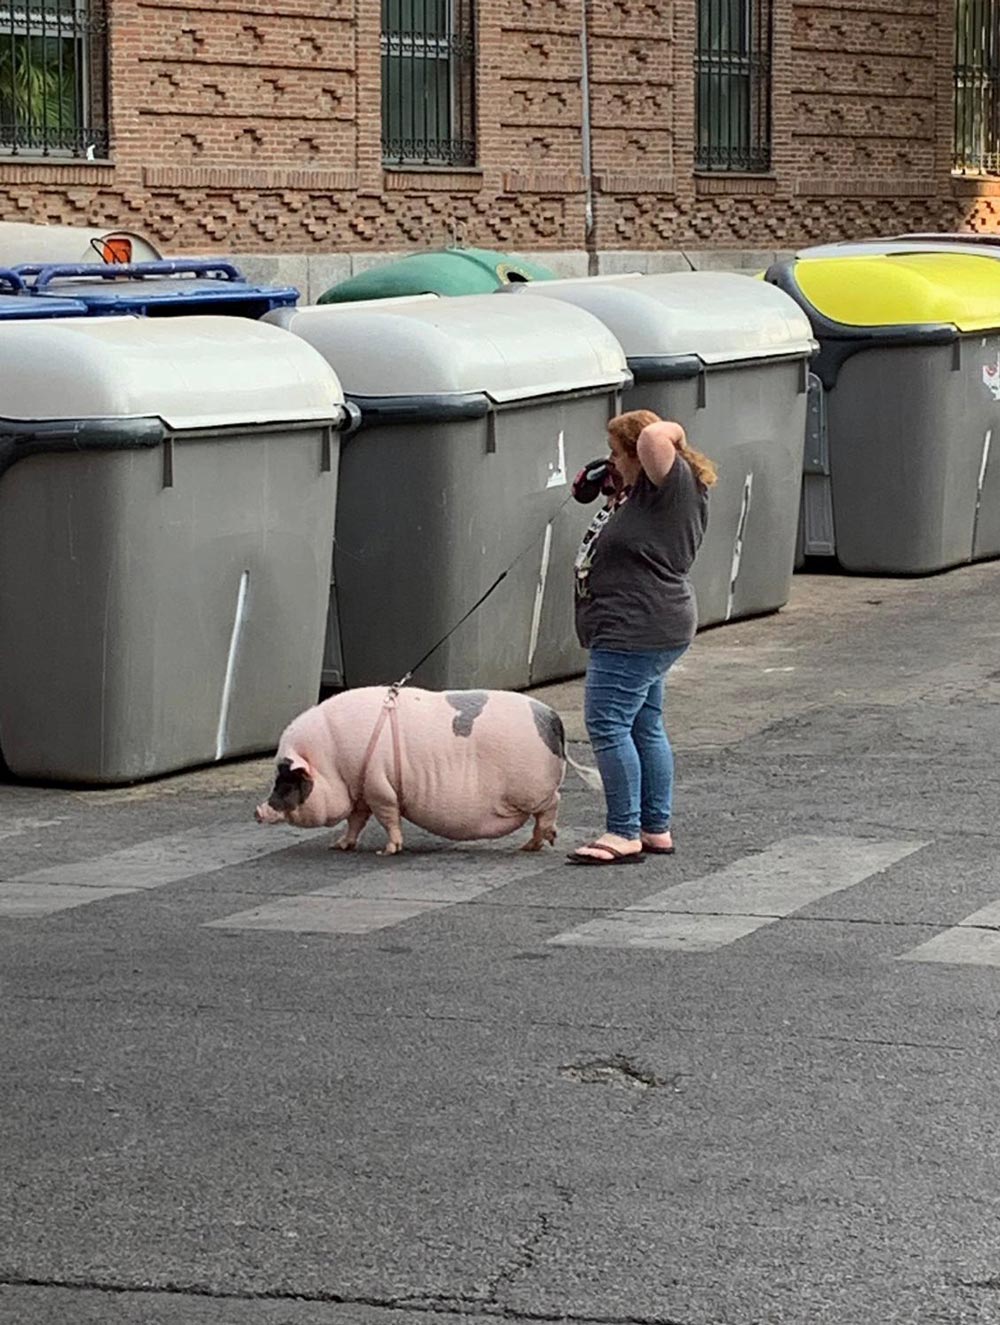 Nothing to see here, just a lady walking her pig